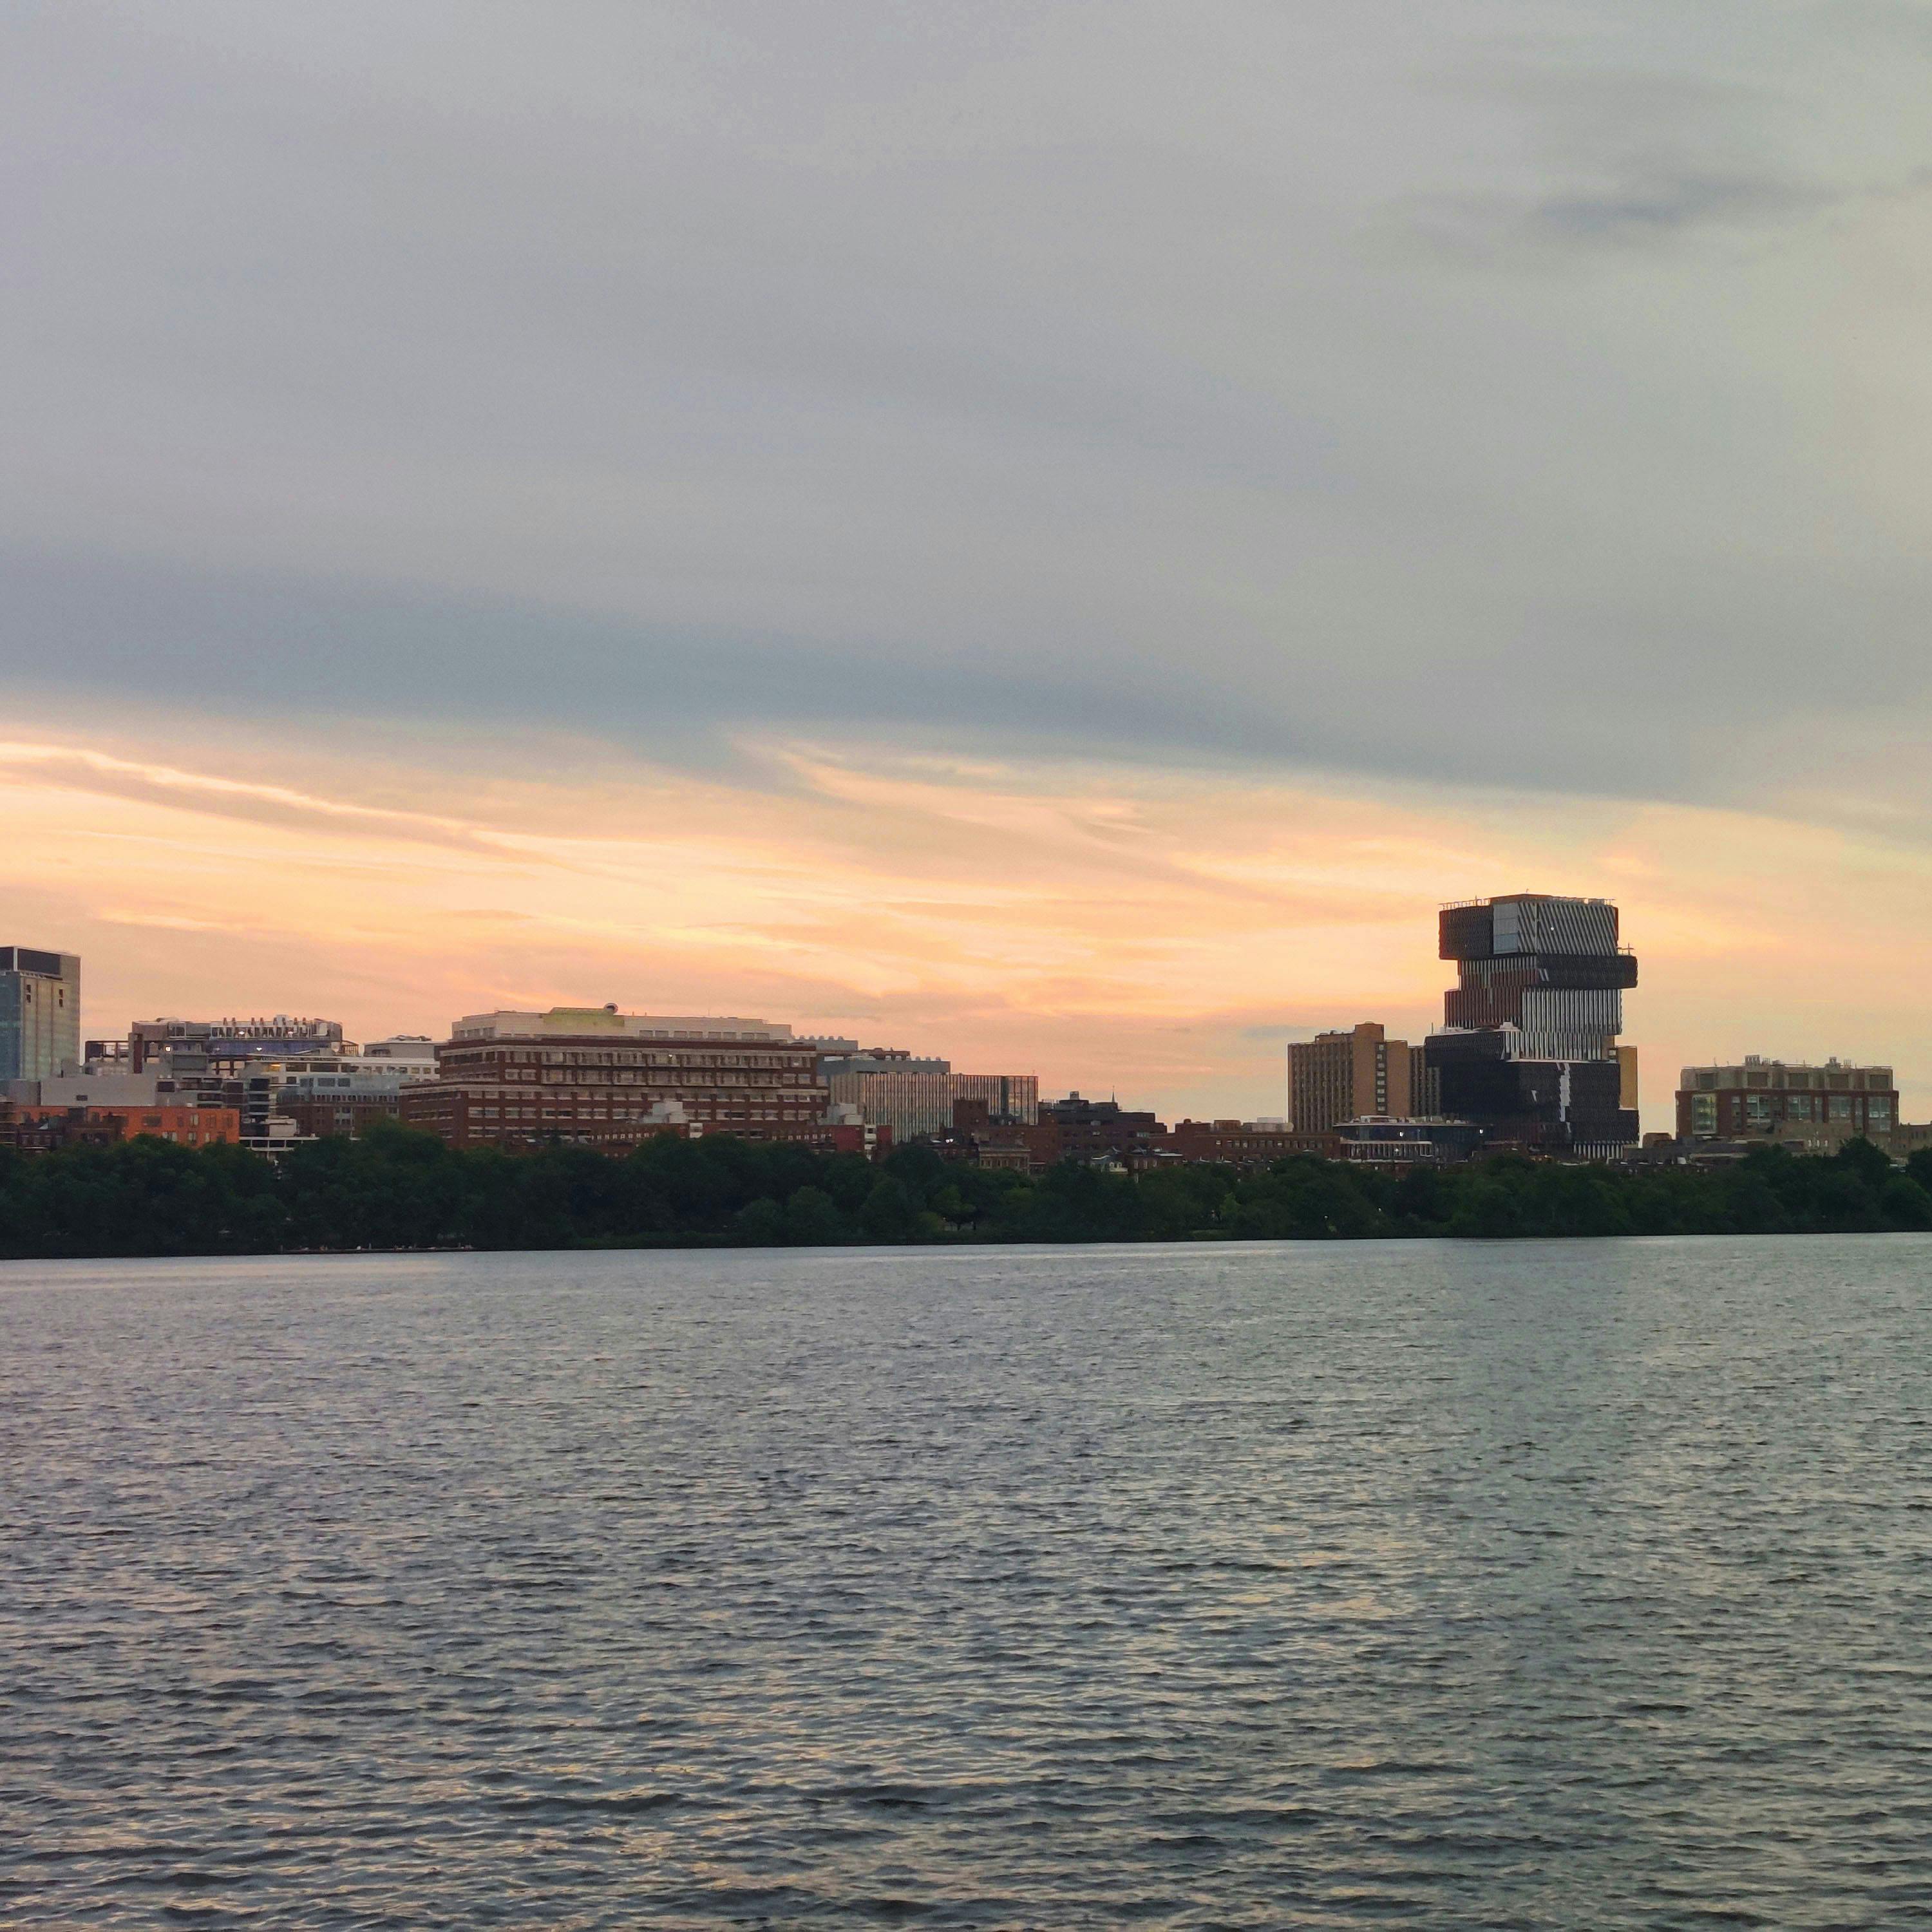 the boston university jenga tower building, from across the river